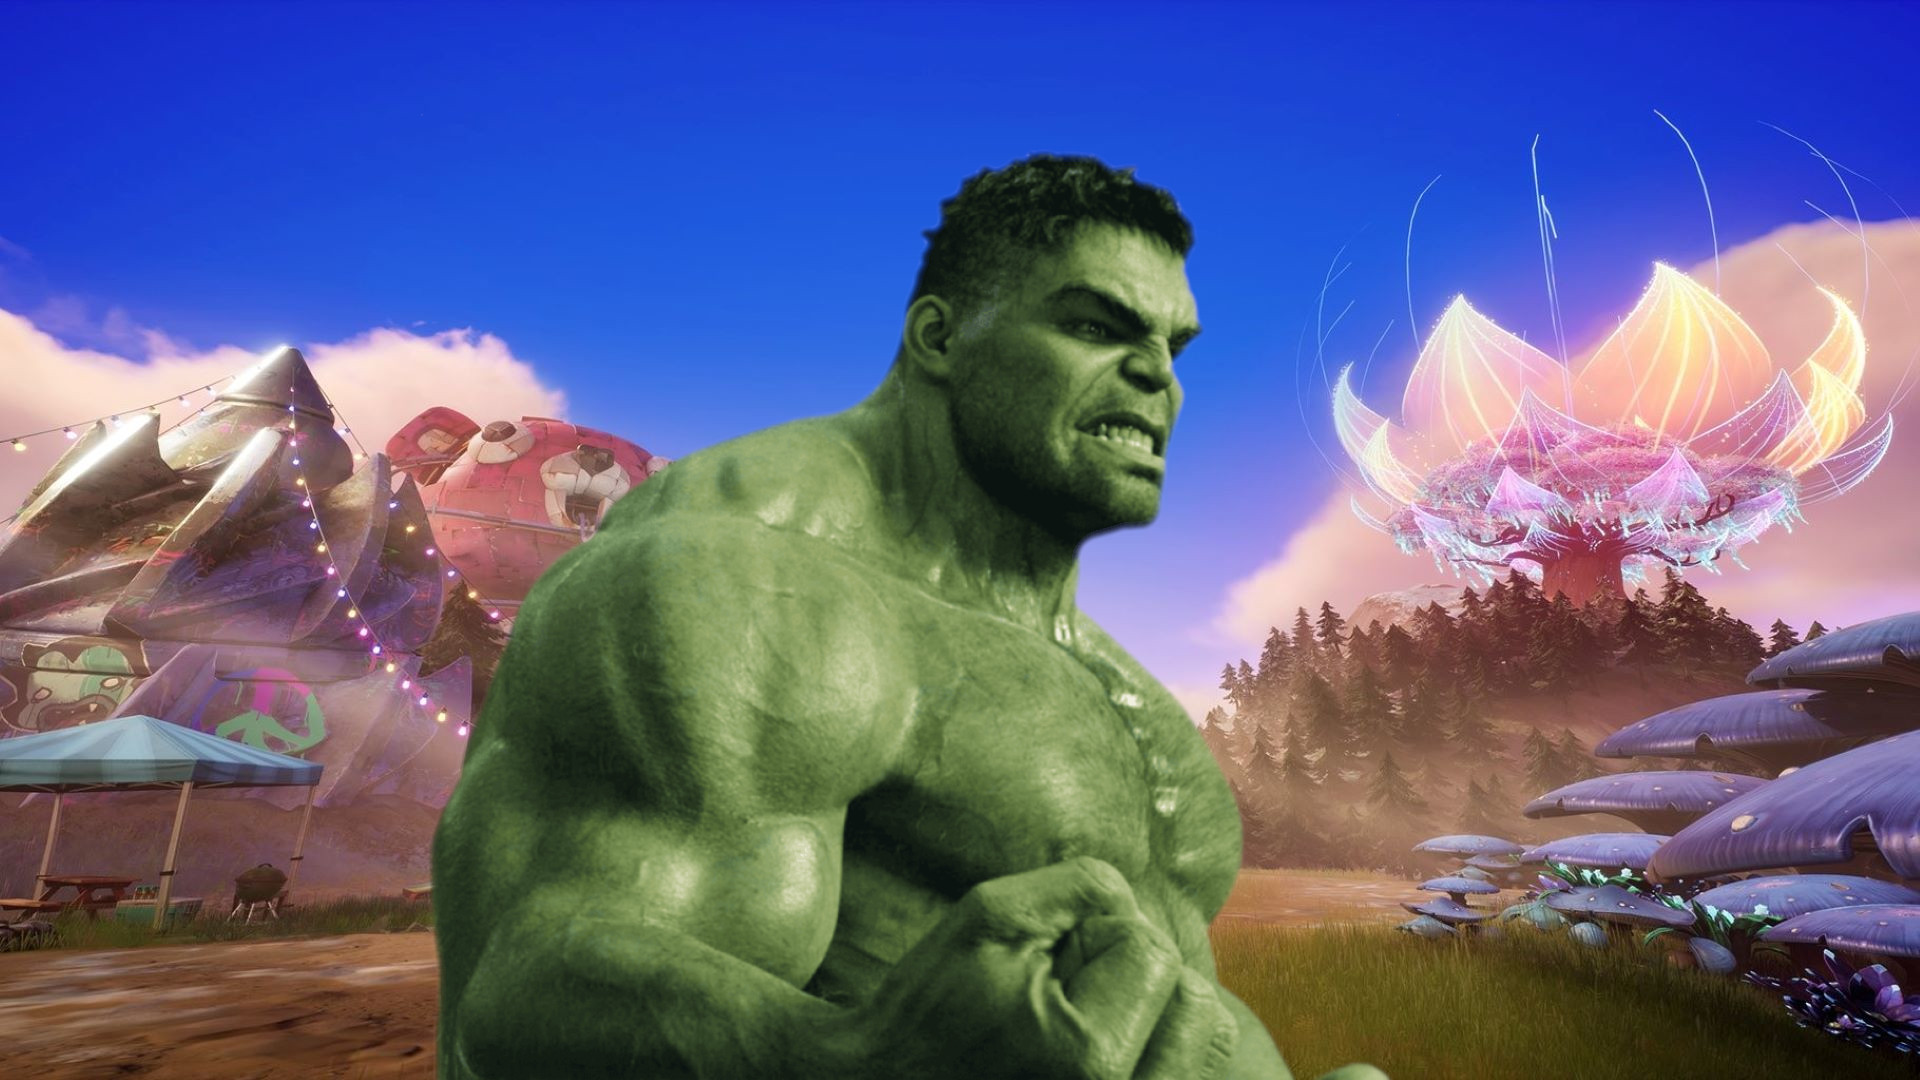 Fortnite skin lets players channel Marvel hero The Incredible Hulk